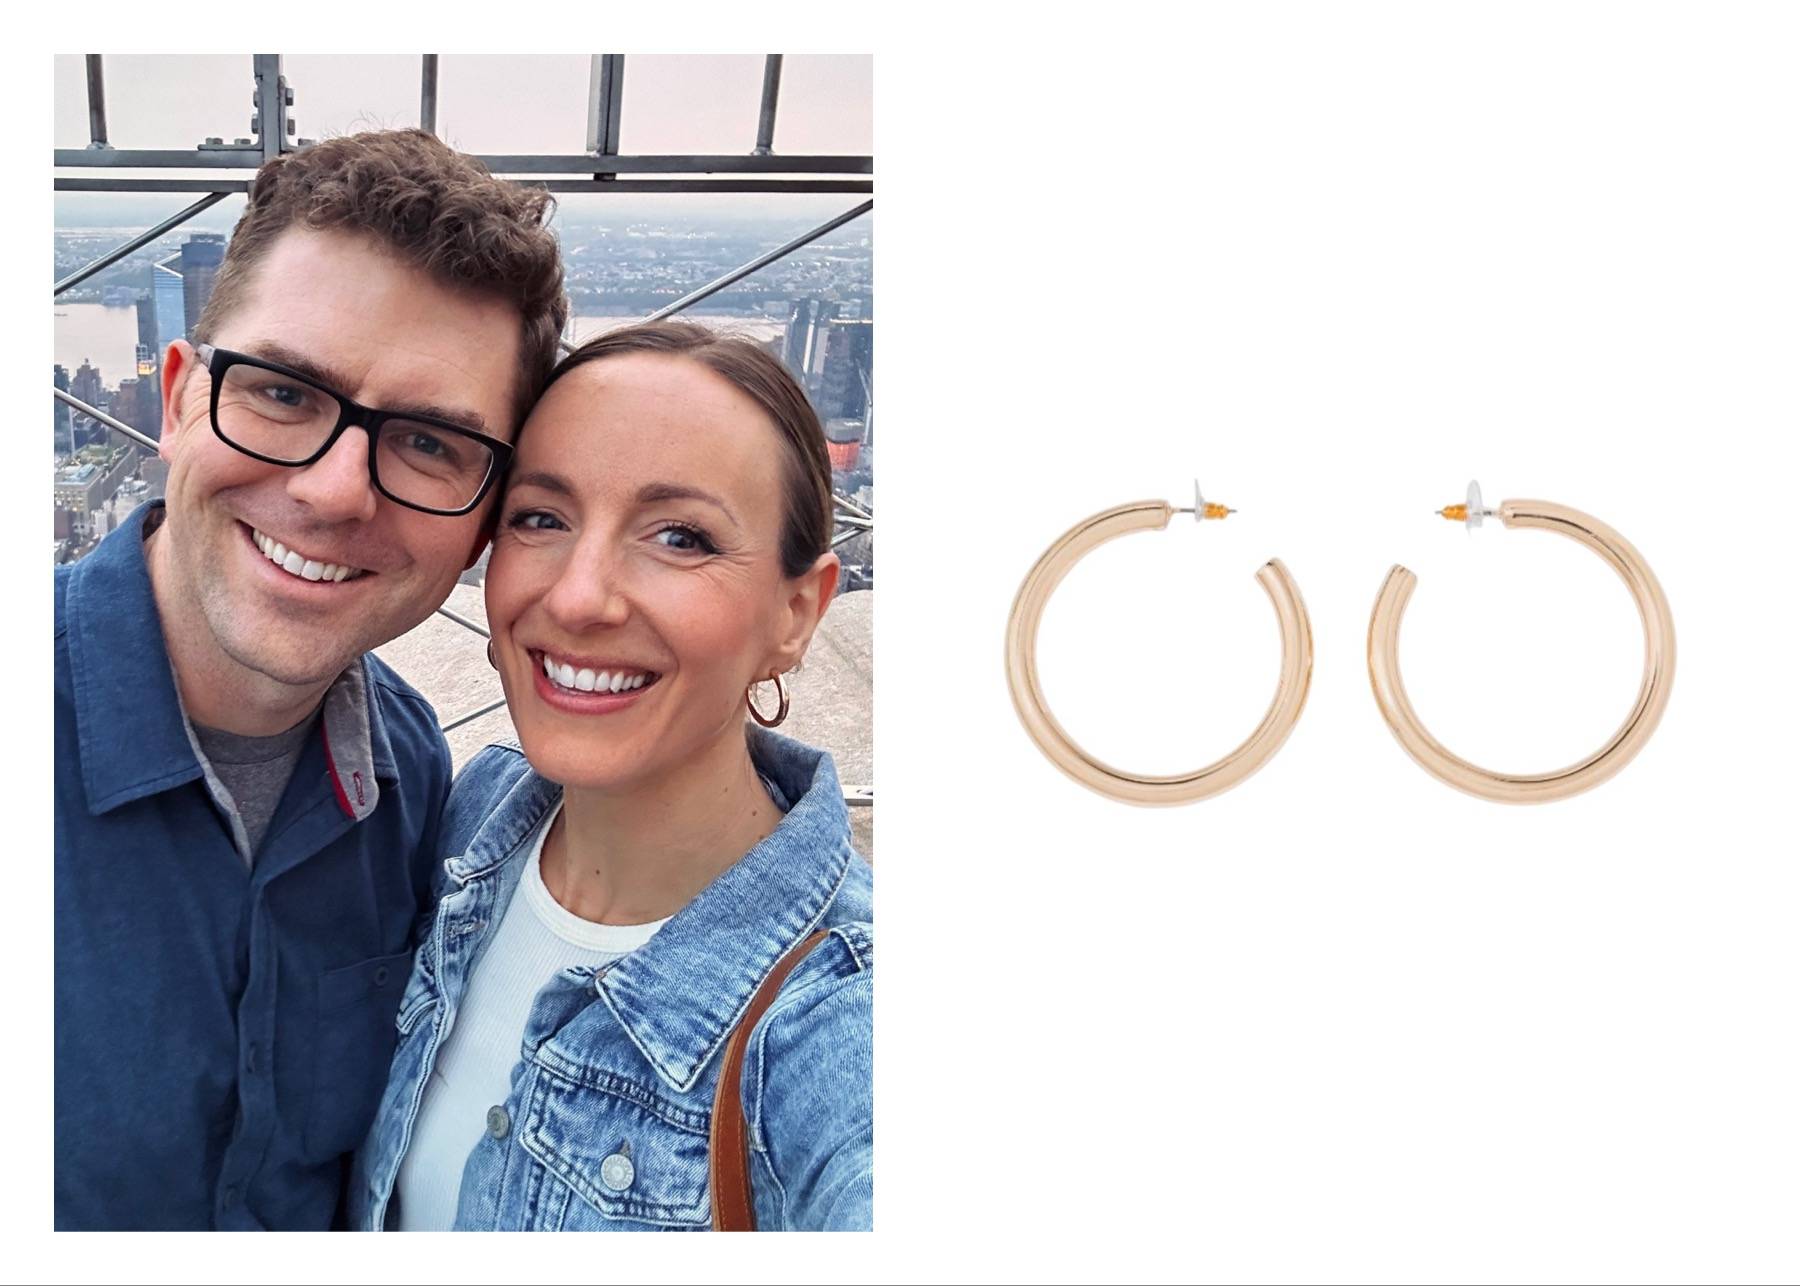 Man and woman taking a selfie in New York next to a stock photo of gold hoop earrings.